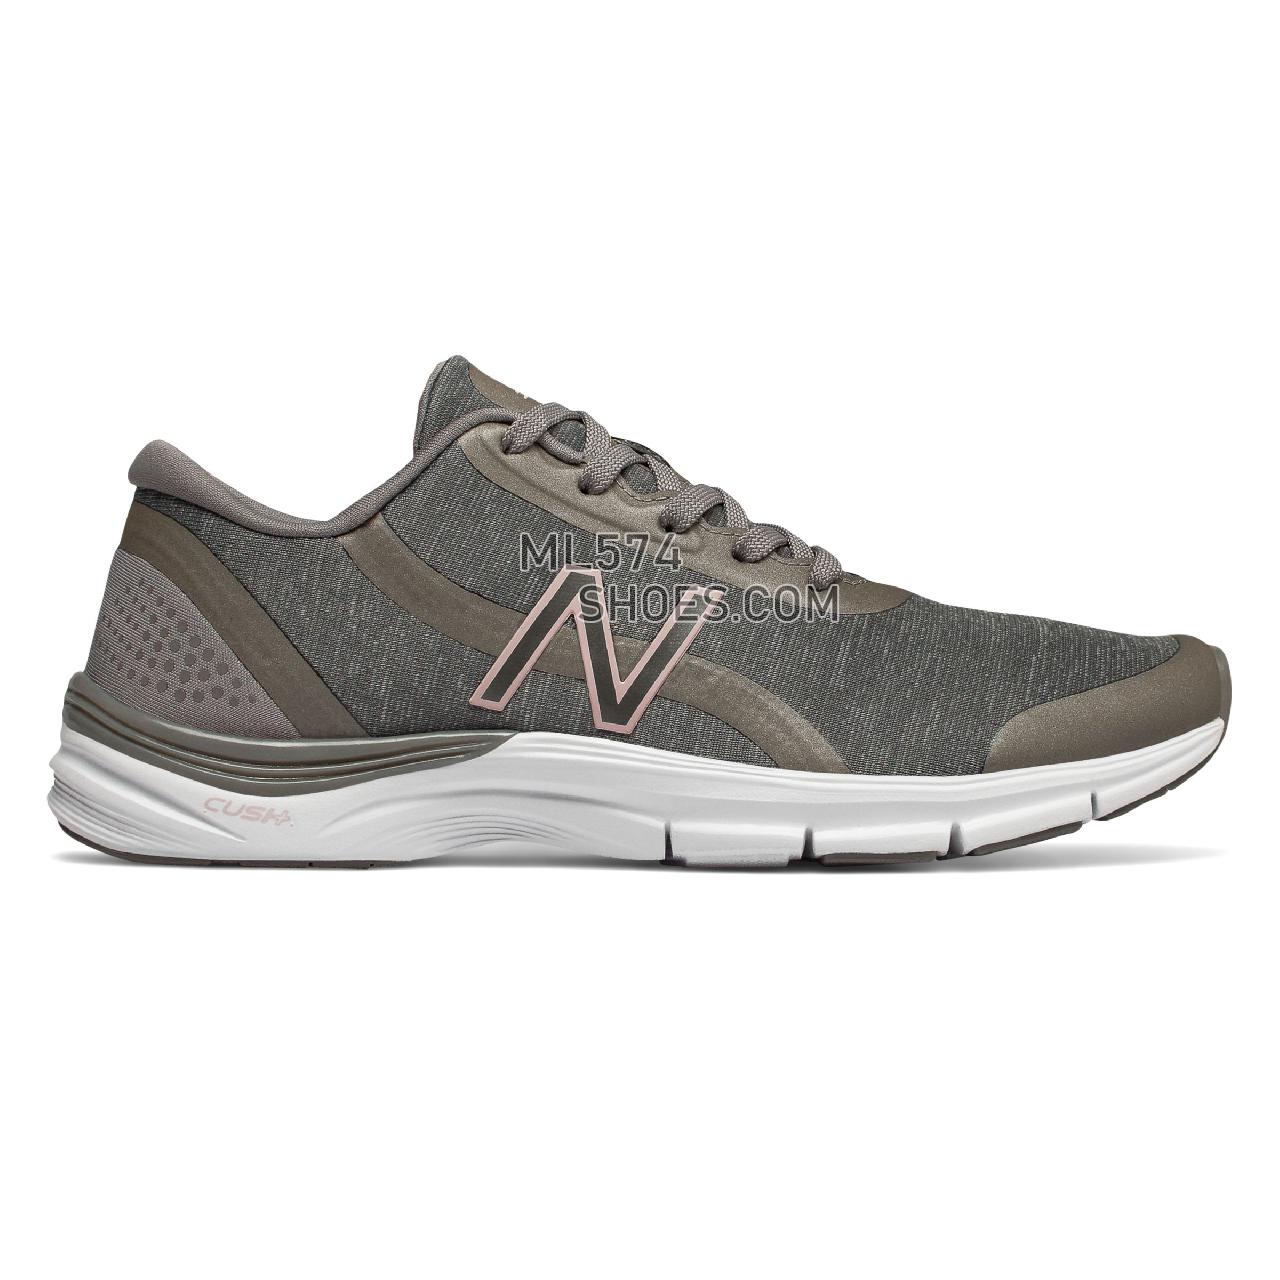 New Balance 711v3 Mesh Trainer - Women's 711 - X-training Marblehead with Conch Shell - WX711MC3